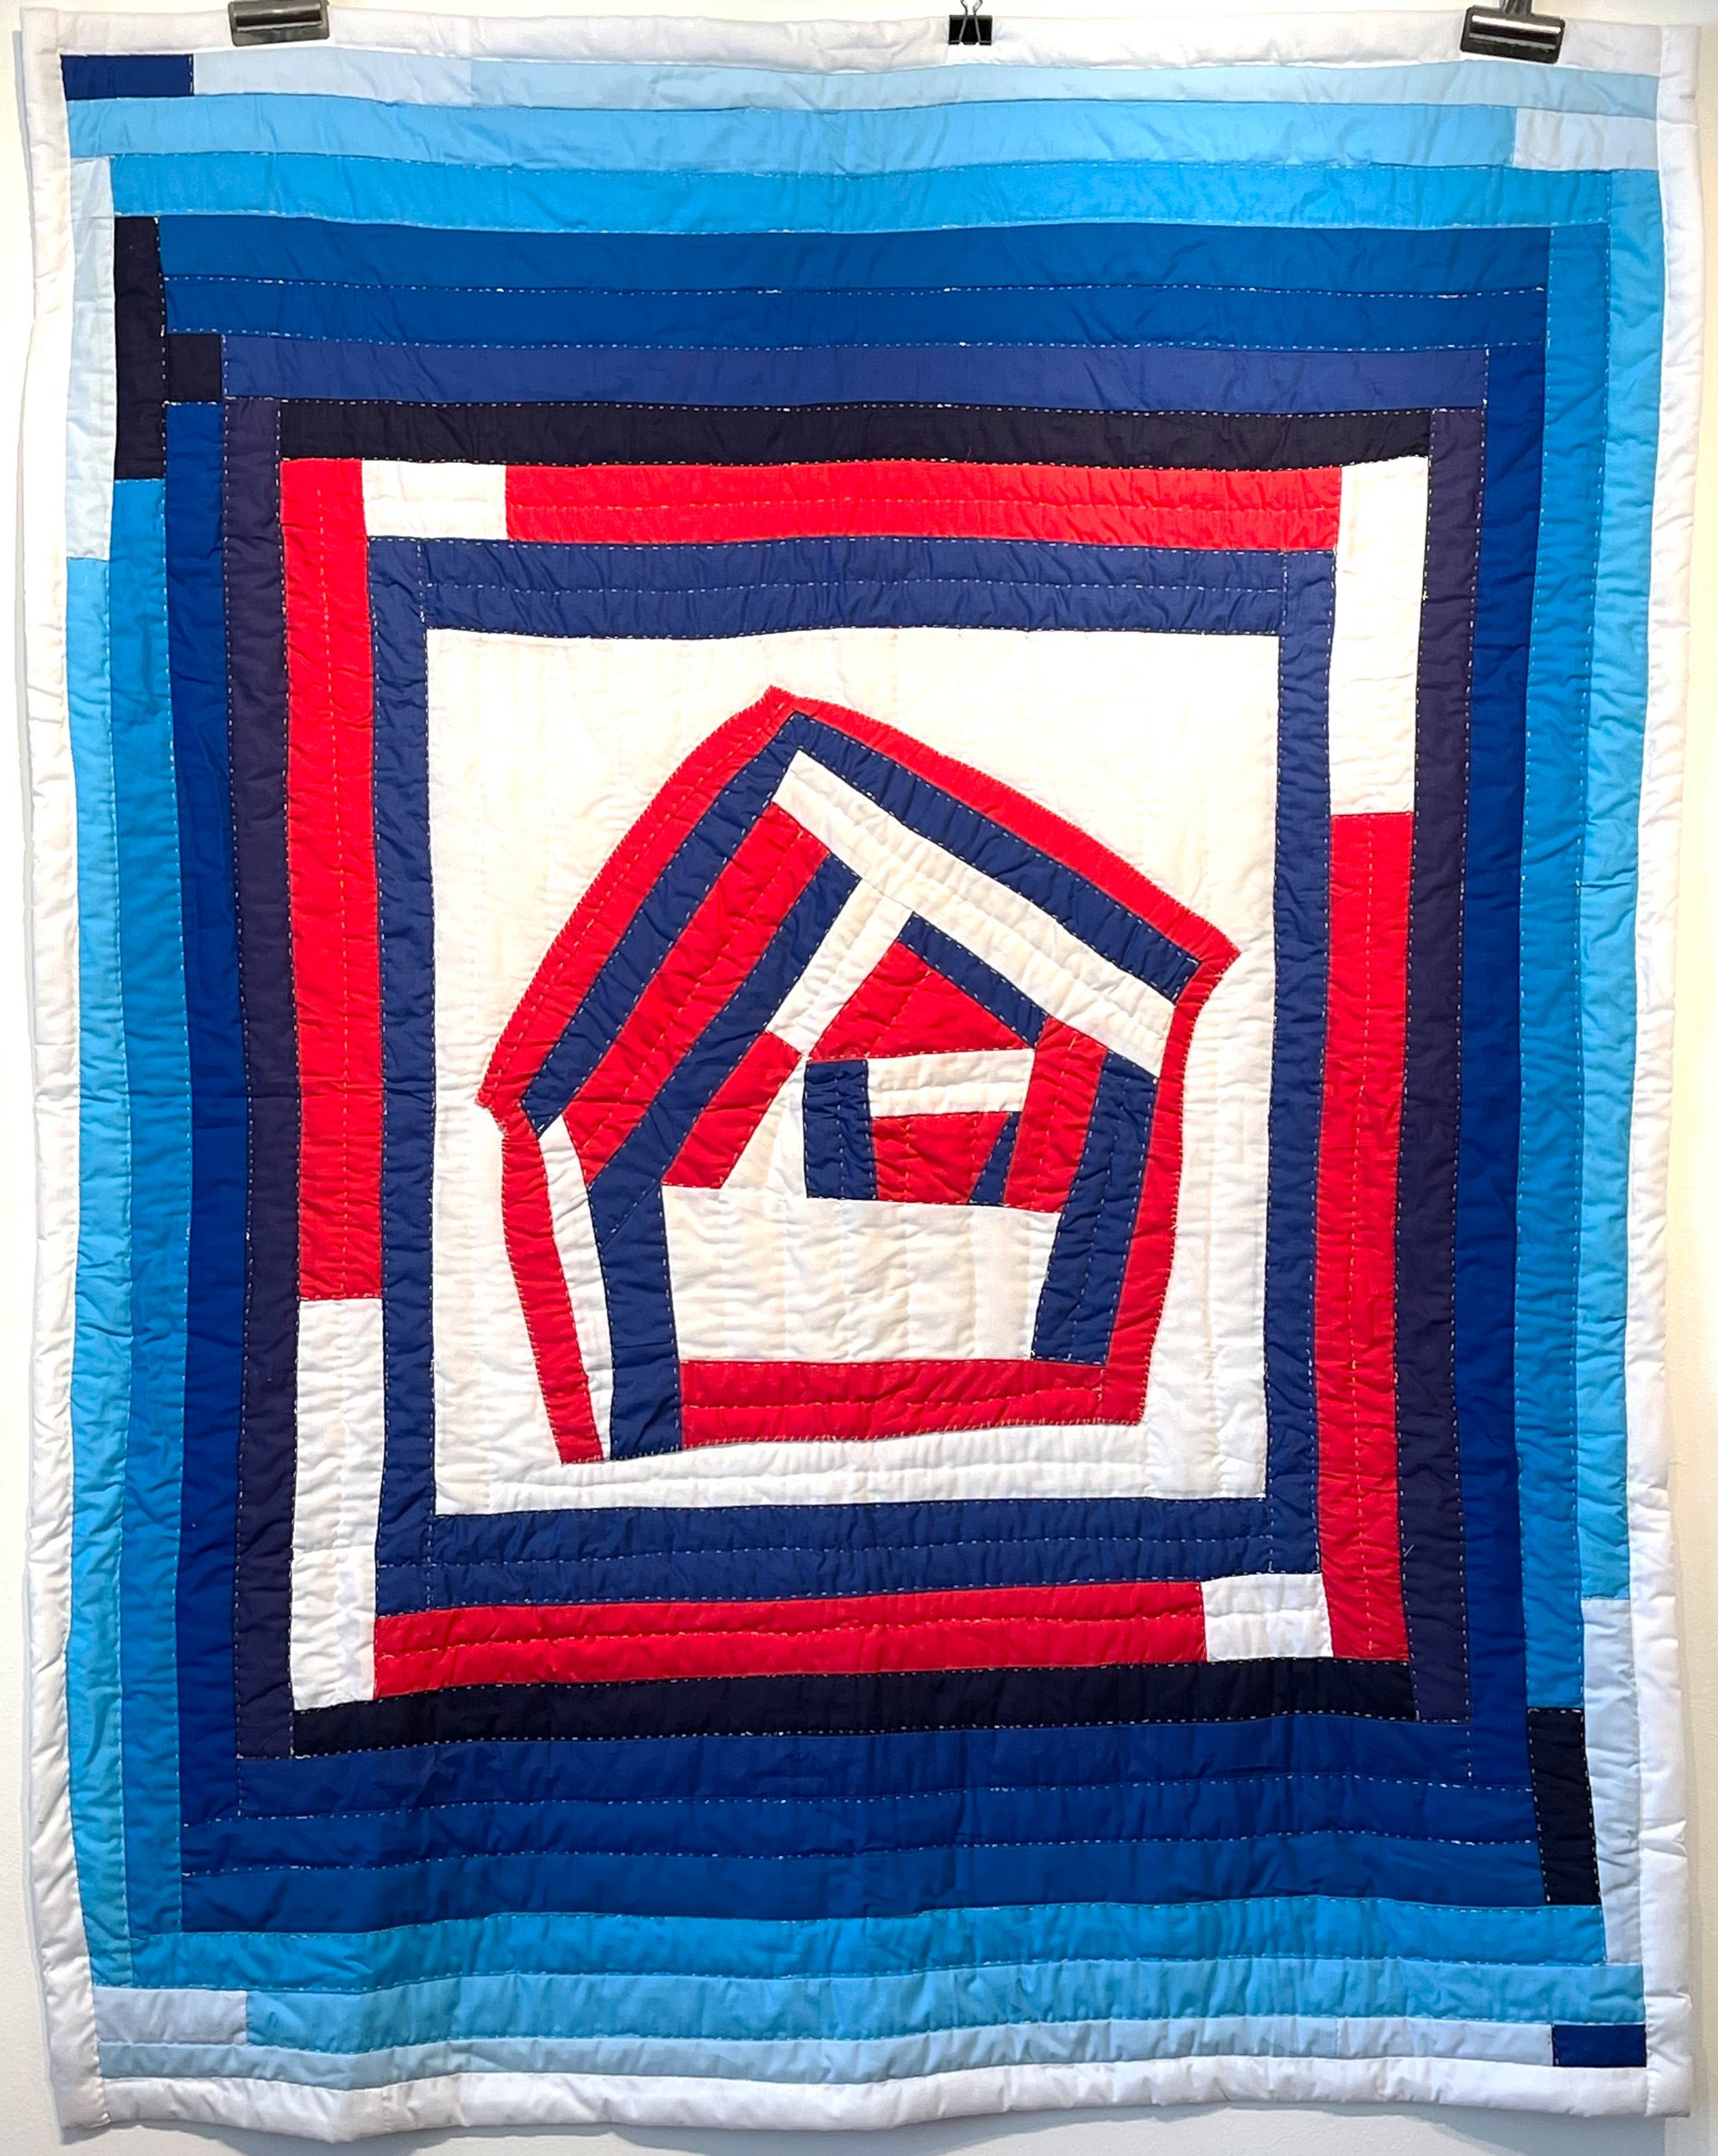   Joeann West (Gee’s Bend, AL)    “America Still Standing”, 2022   60” x 48”, cotton fabrics  Hand-quilted    ASK ABOUT THIS QUILT   